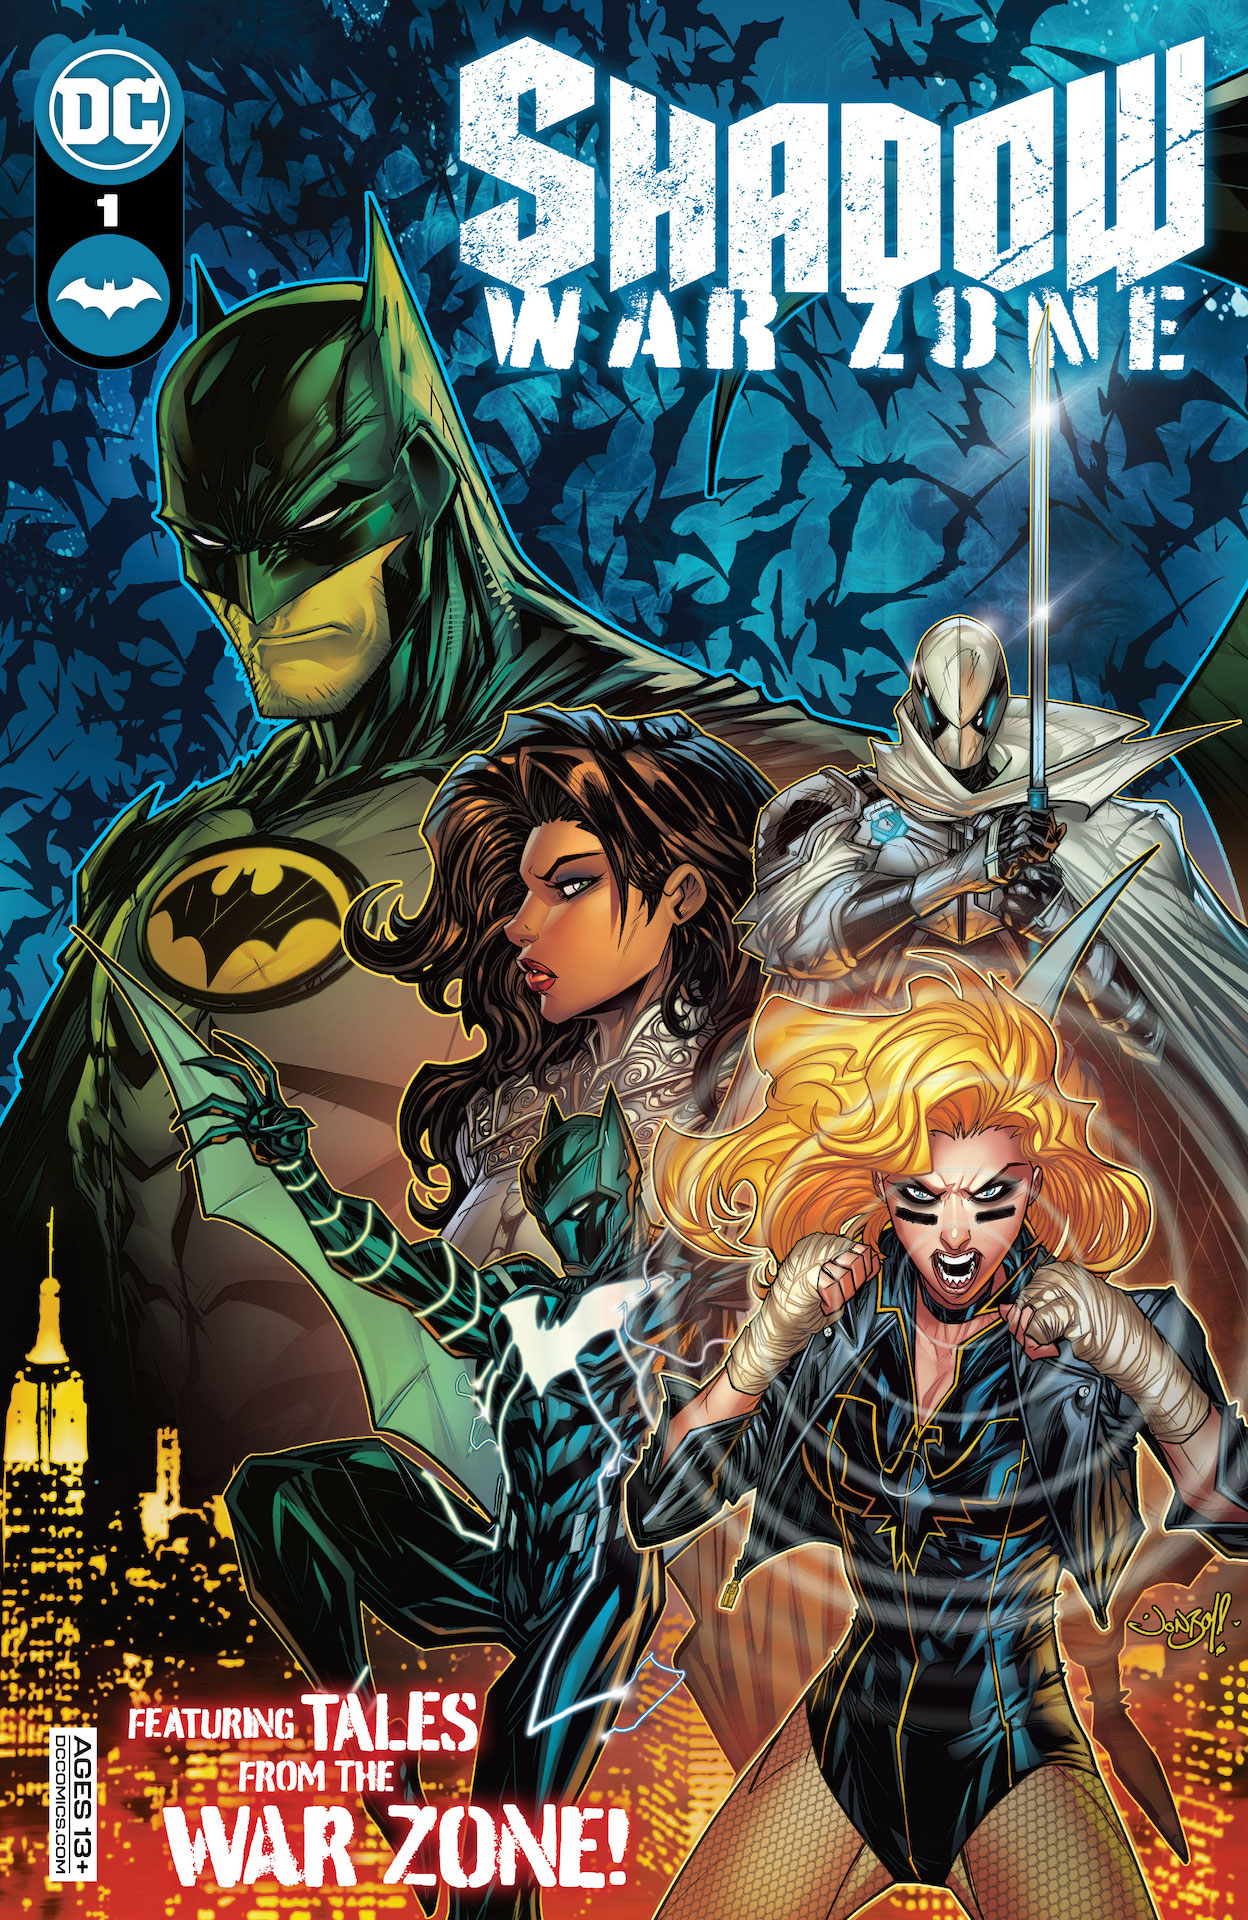 DC Preview: Shadow War Zone #1